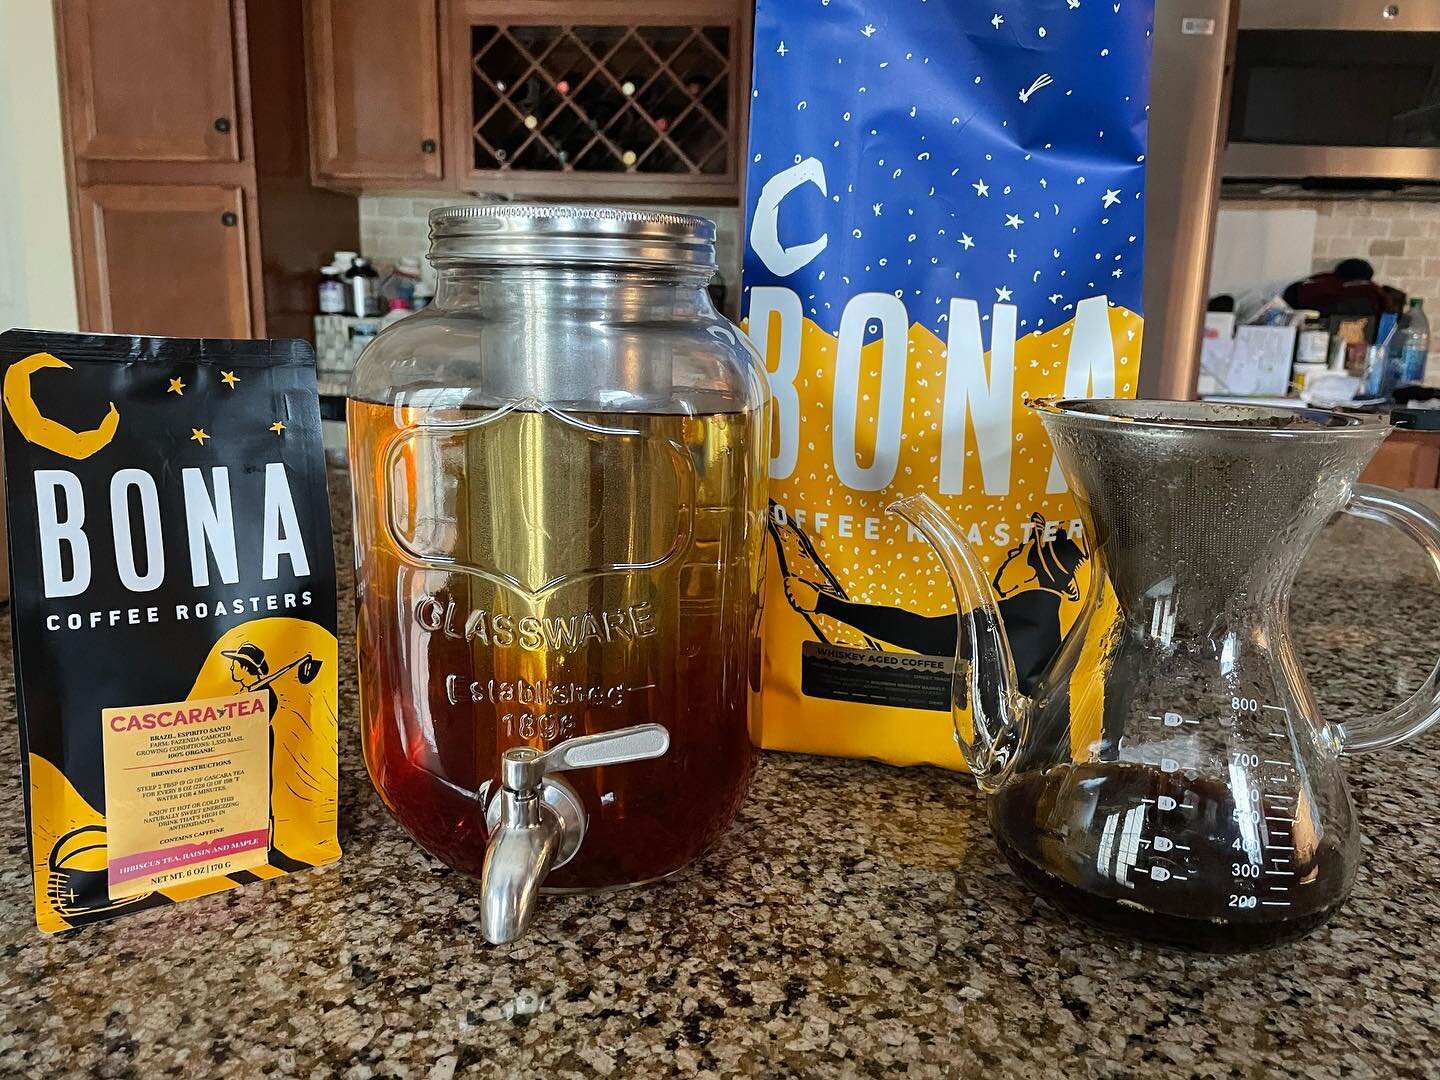 Happy Thor&rsquo;s-Day! We&rsquo;ve been experimenting in the lab with some awesome new releases from @bonacoffeeroasters! 

Cascara tea is something we didn&rsquo;t know we needed in our lives and we&rsquo;re never looking back! 

#TheJollyViking #L